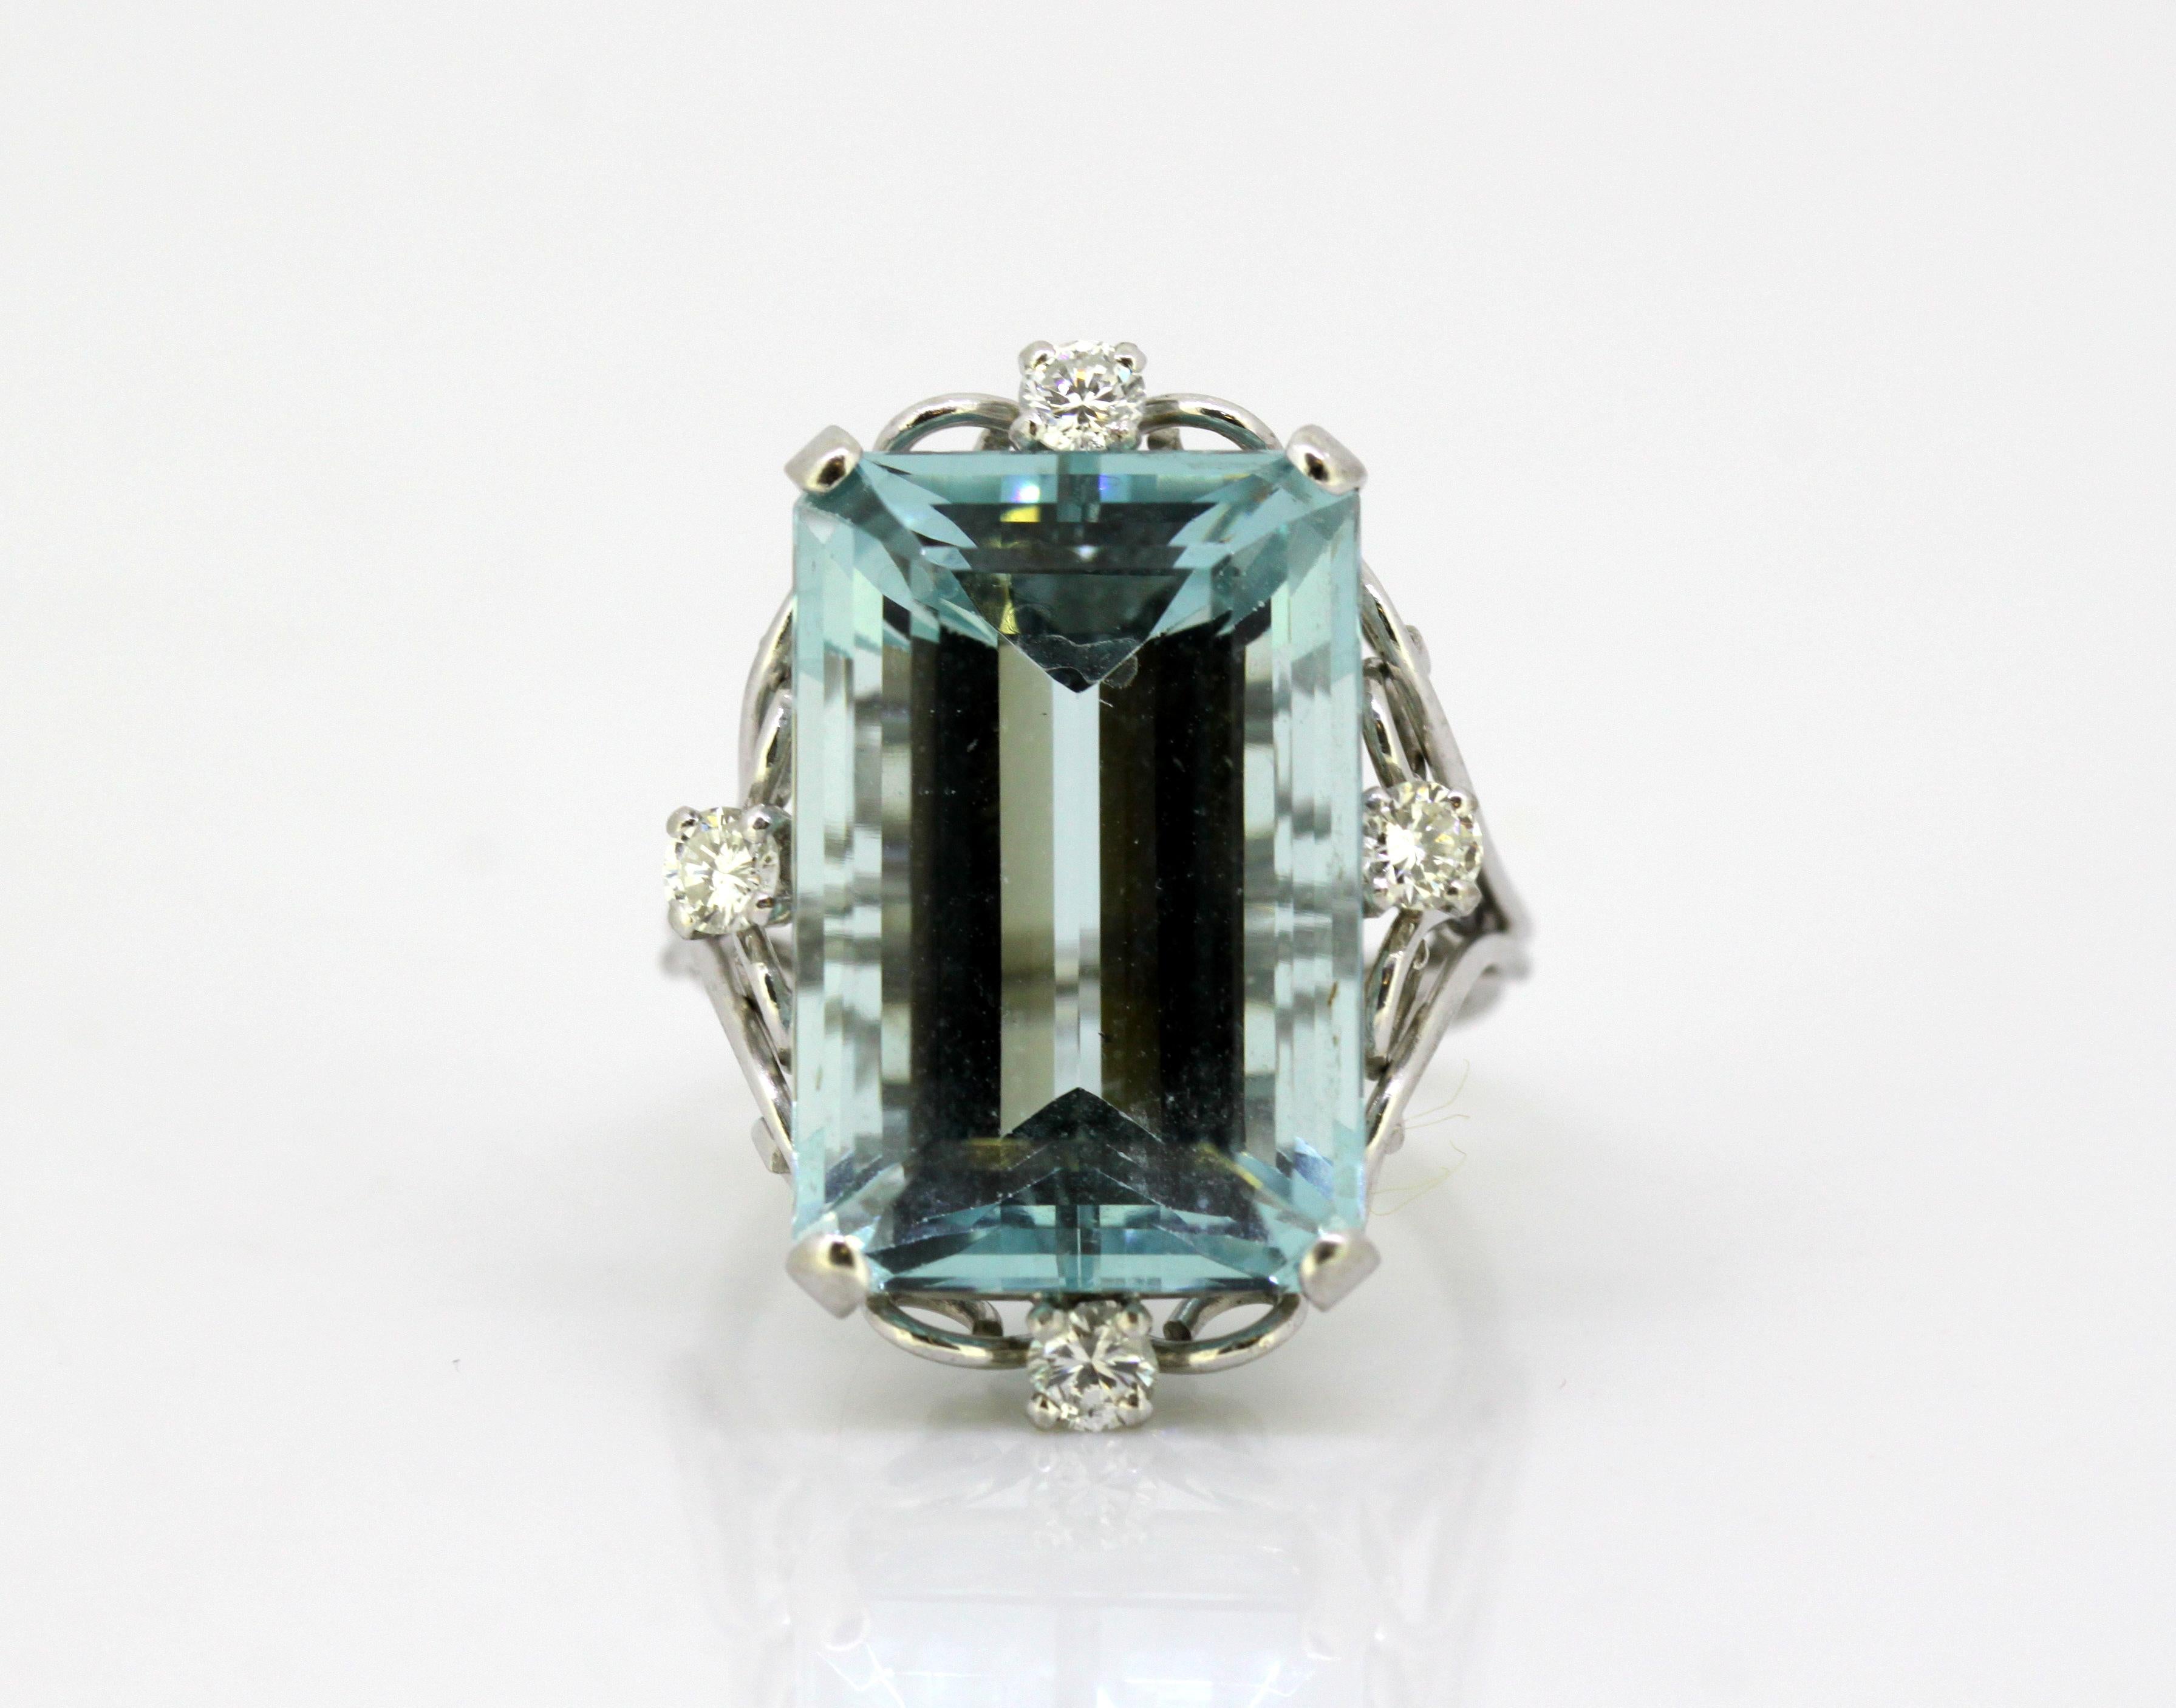 Vintage 18kt white gold ladies ring with natural aquamarine and diamonds.
Made in 1970's.
No hallmark, tested positive for 18k gold.

Dimensions -
Finger Size: (UK) = J (US) = 5 1/4 (EU) = 49 1/2
Size :  2.9 x 2.2 x 2.5 cm
Weight: 11 grams